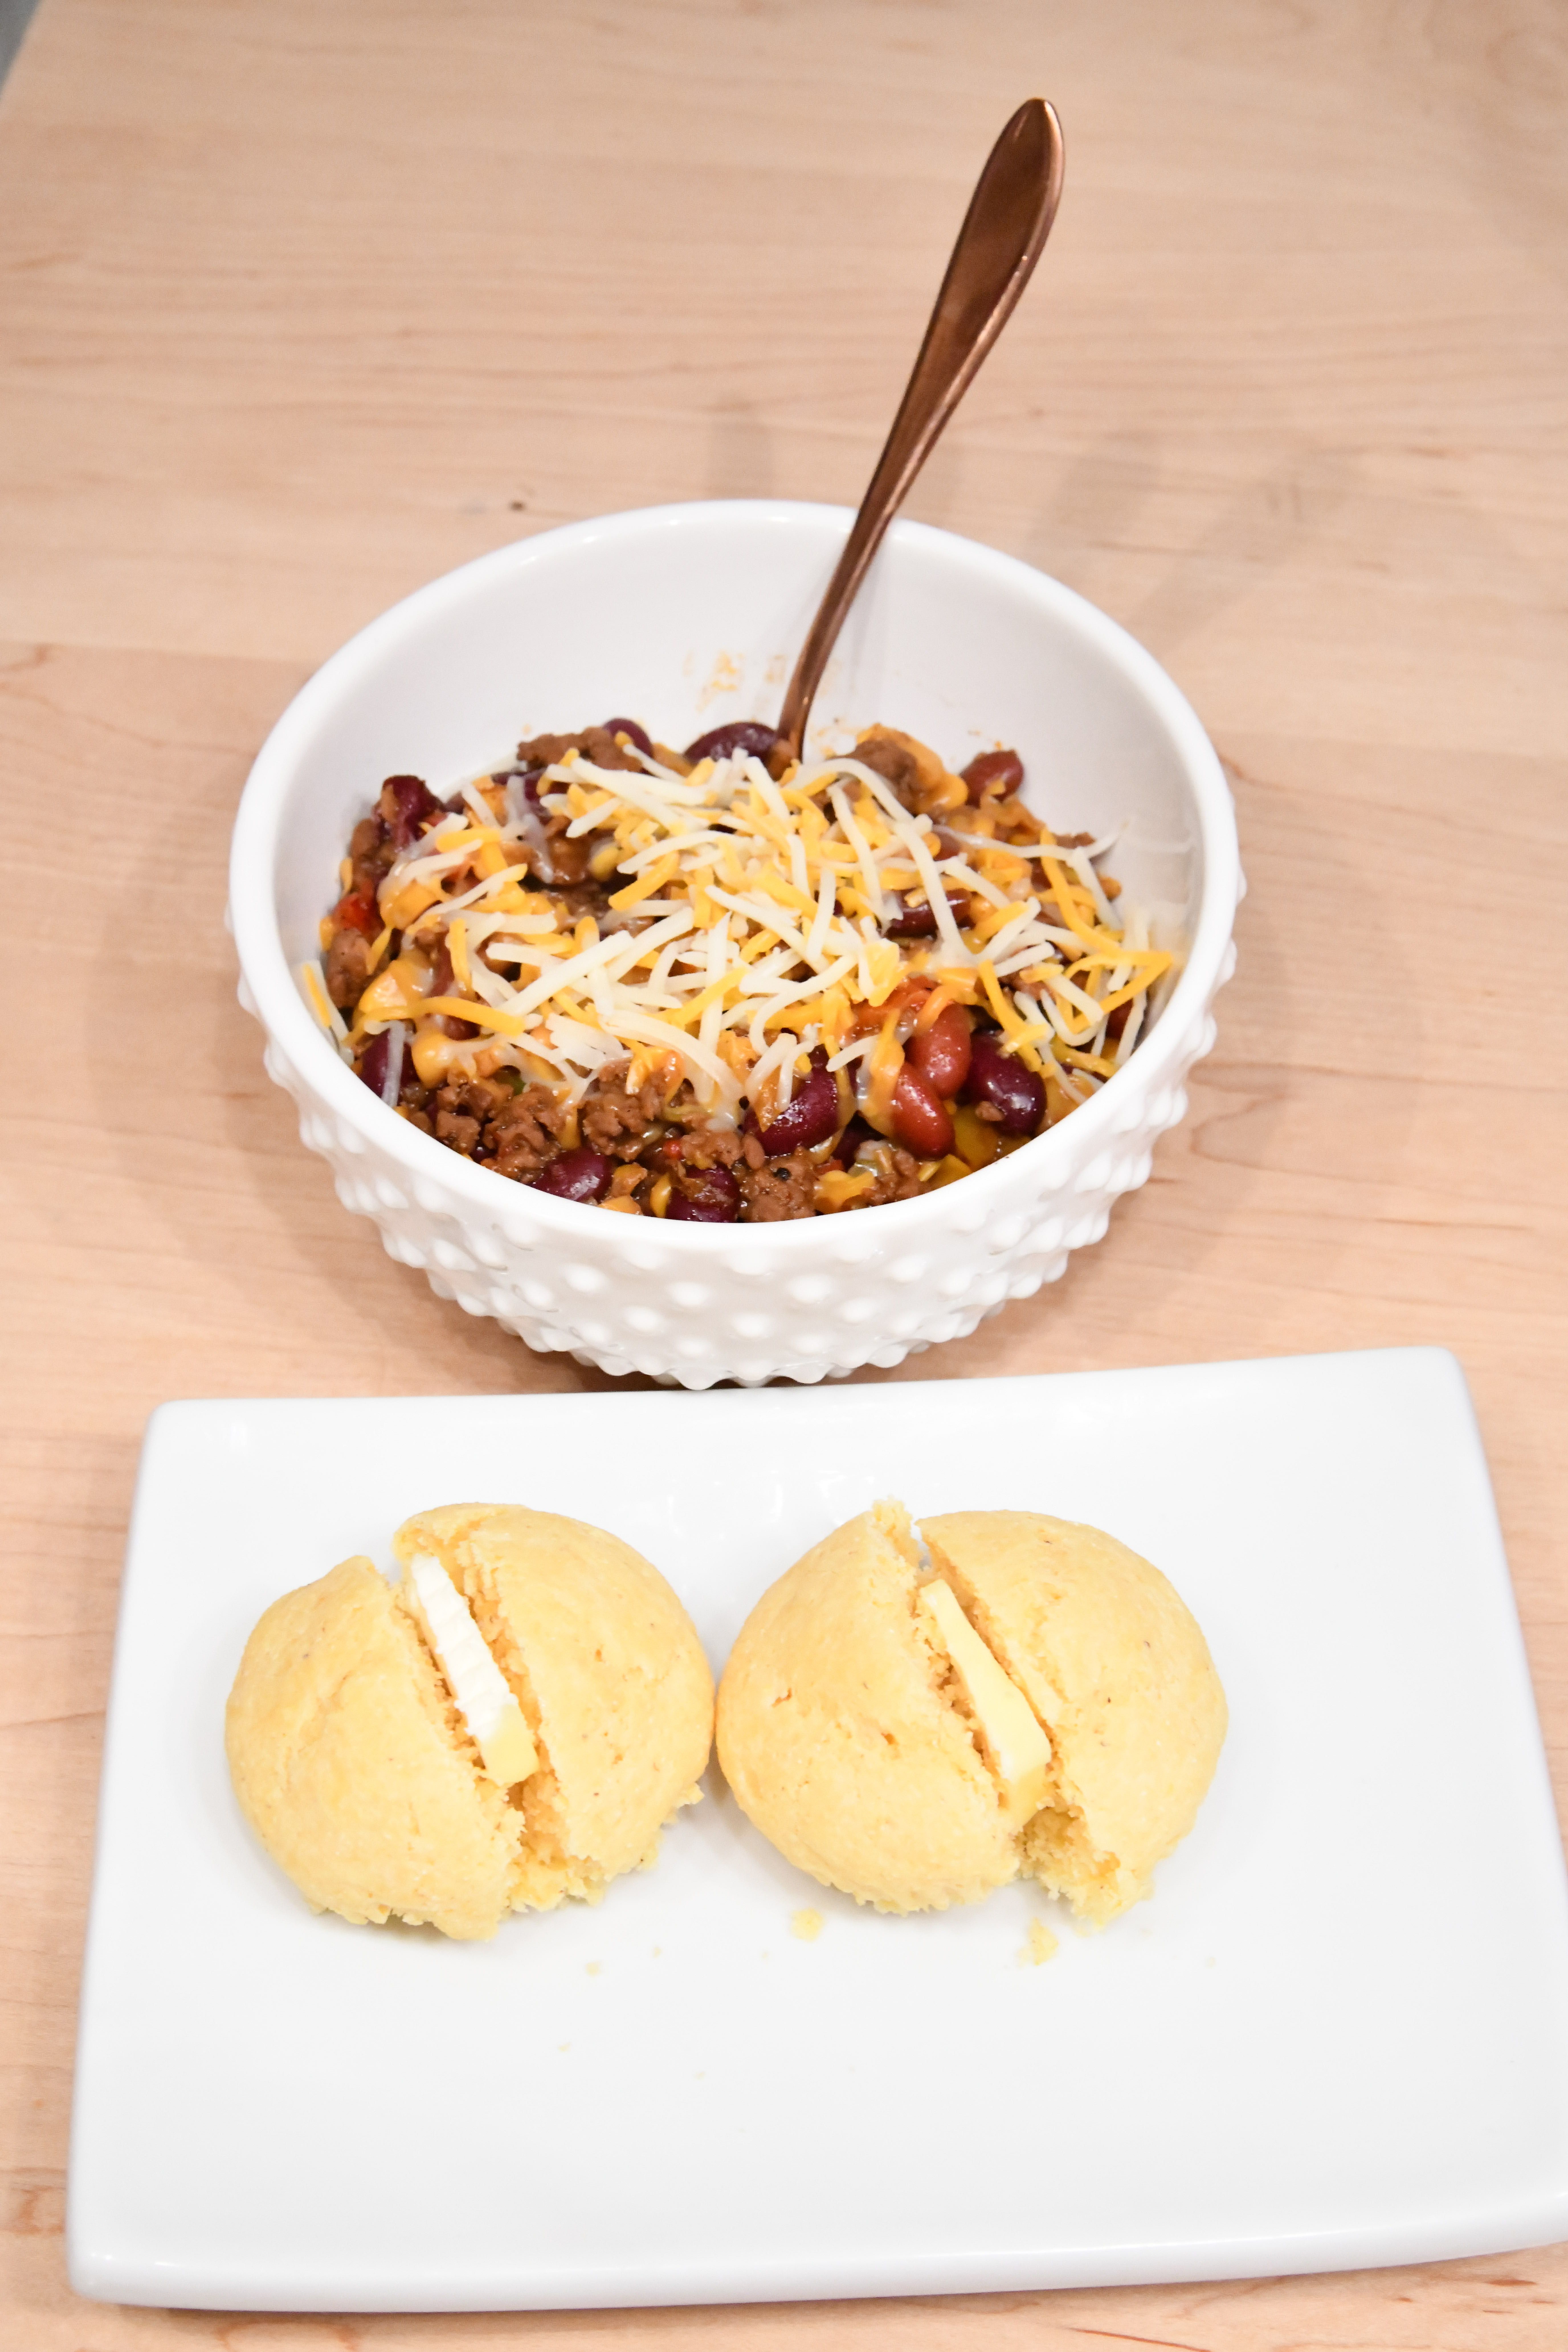 Chili with cheese in bowl corn bread on plate with butter